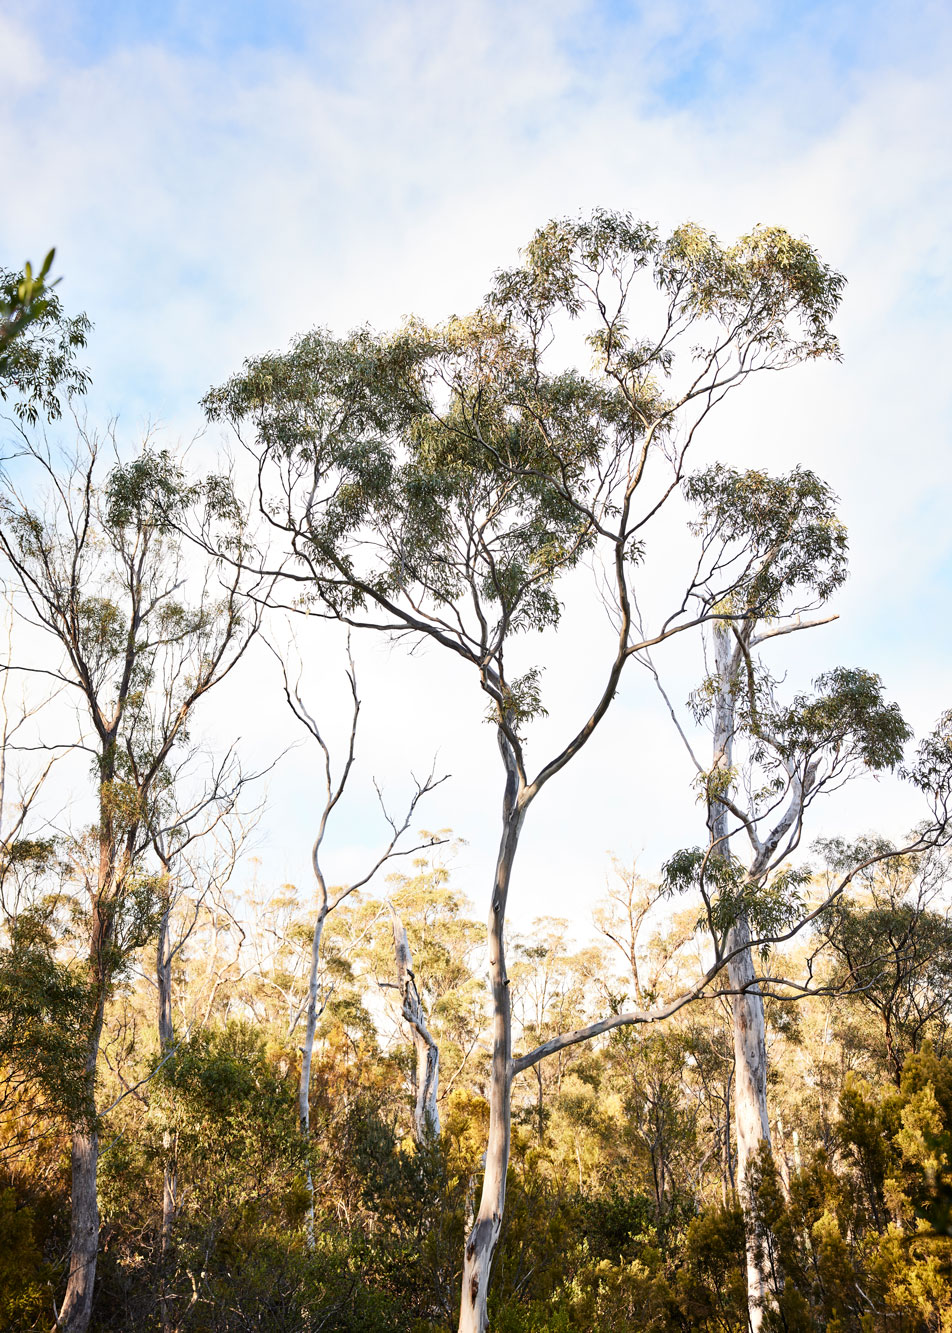 A photo of gum trees against the sky